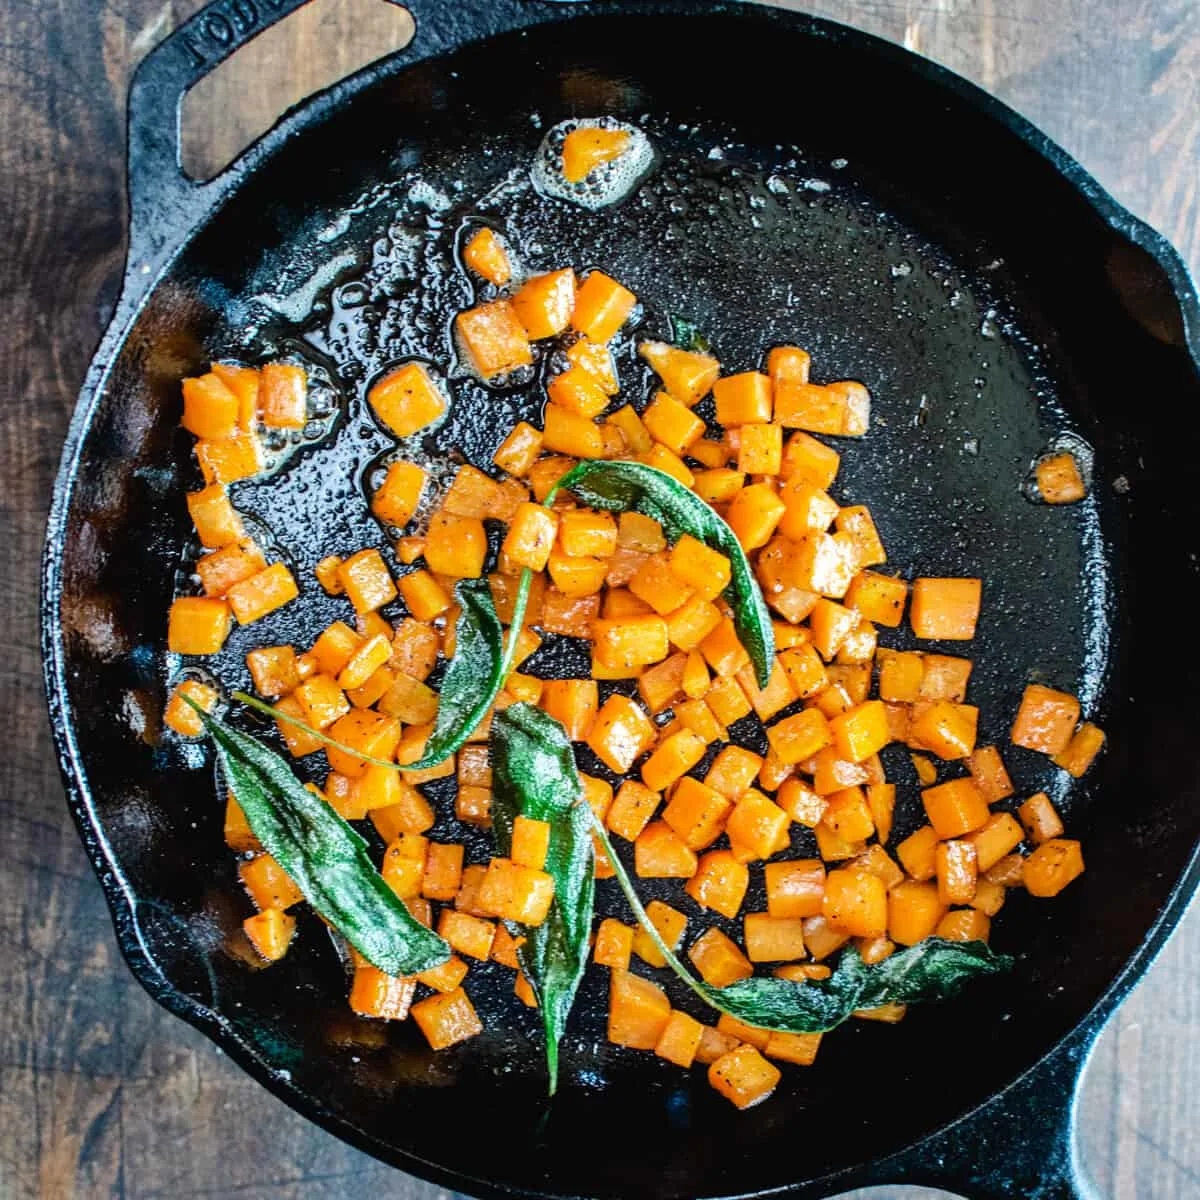 Diced sweet potato and sage being fried in a skillet